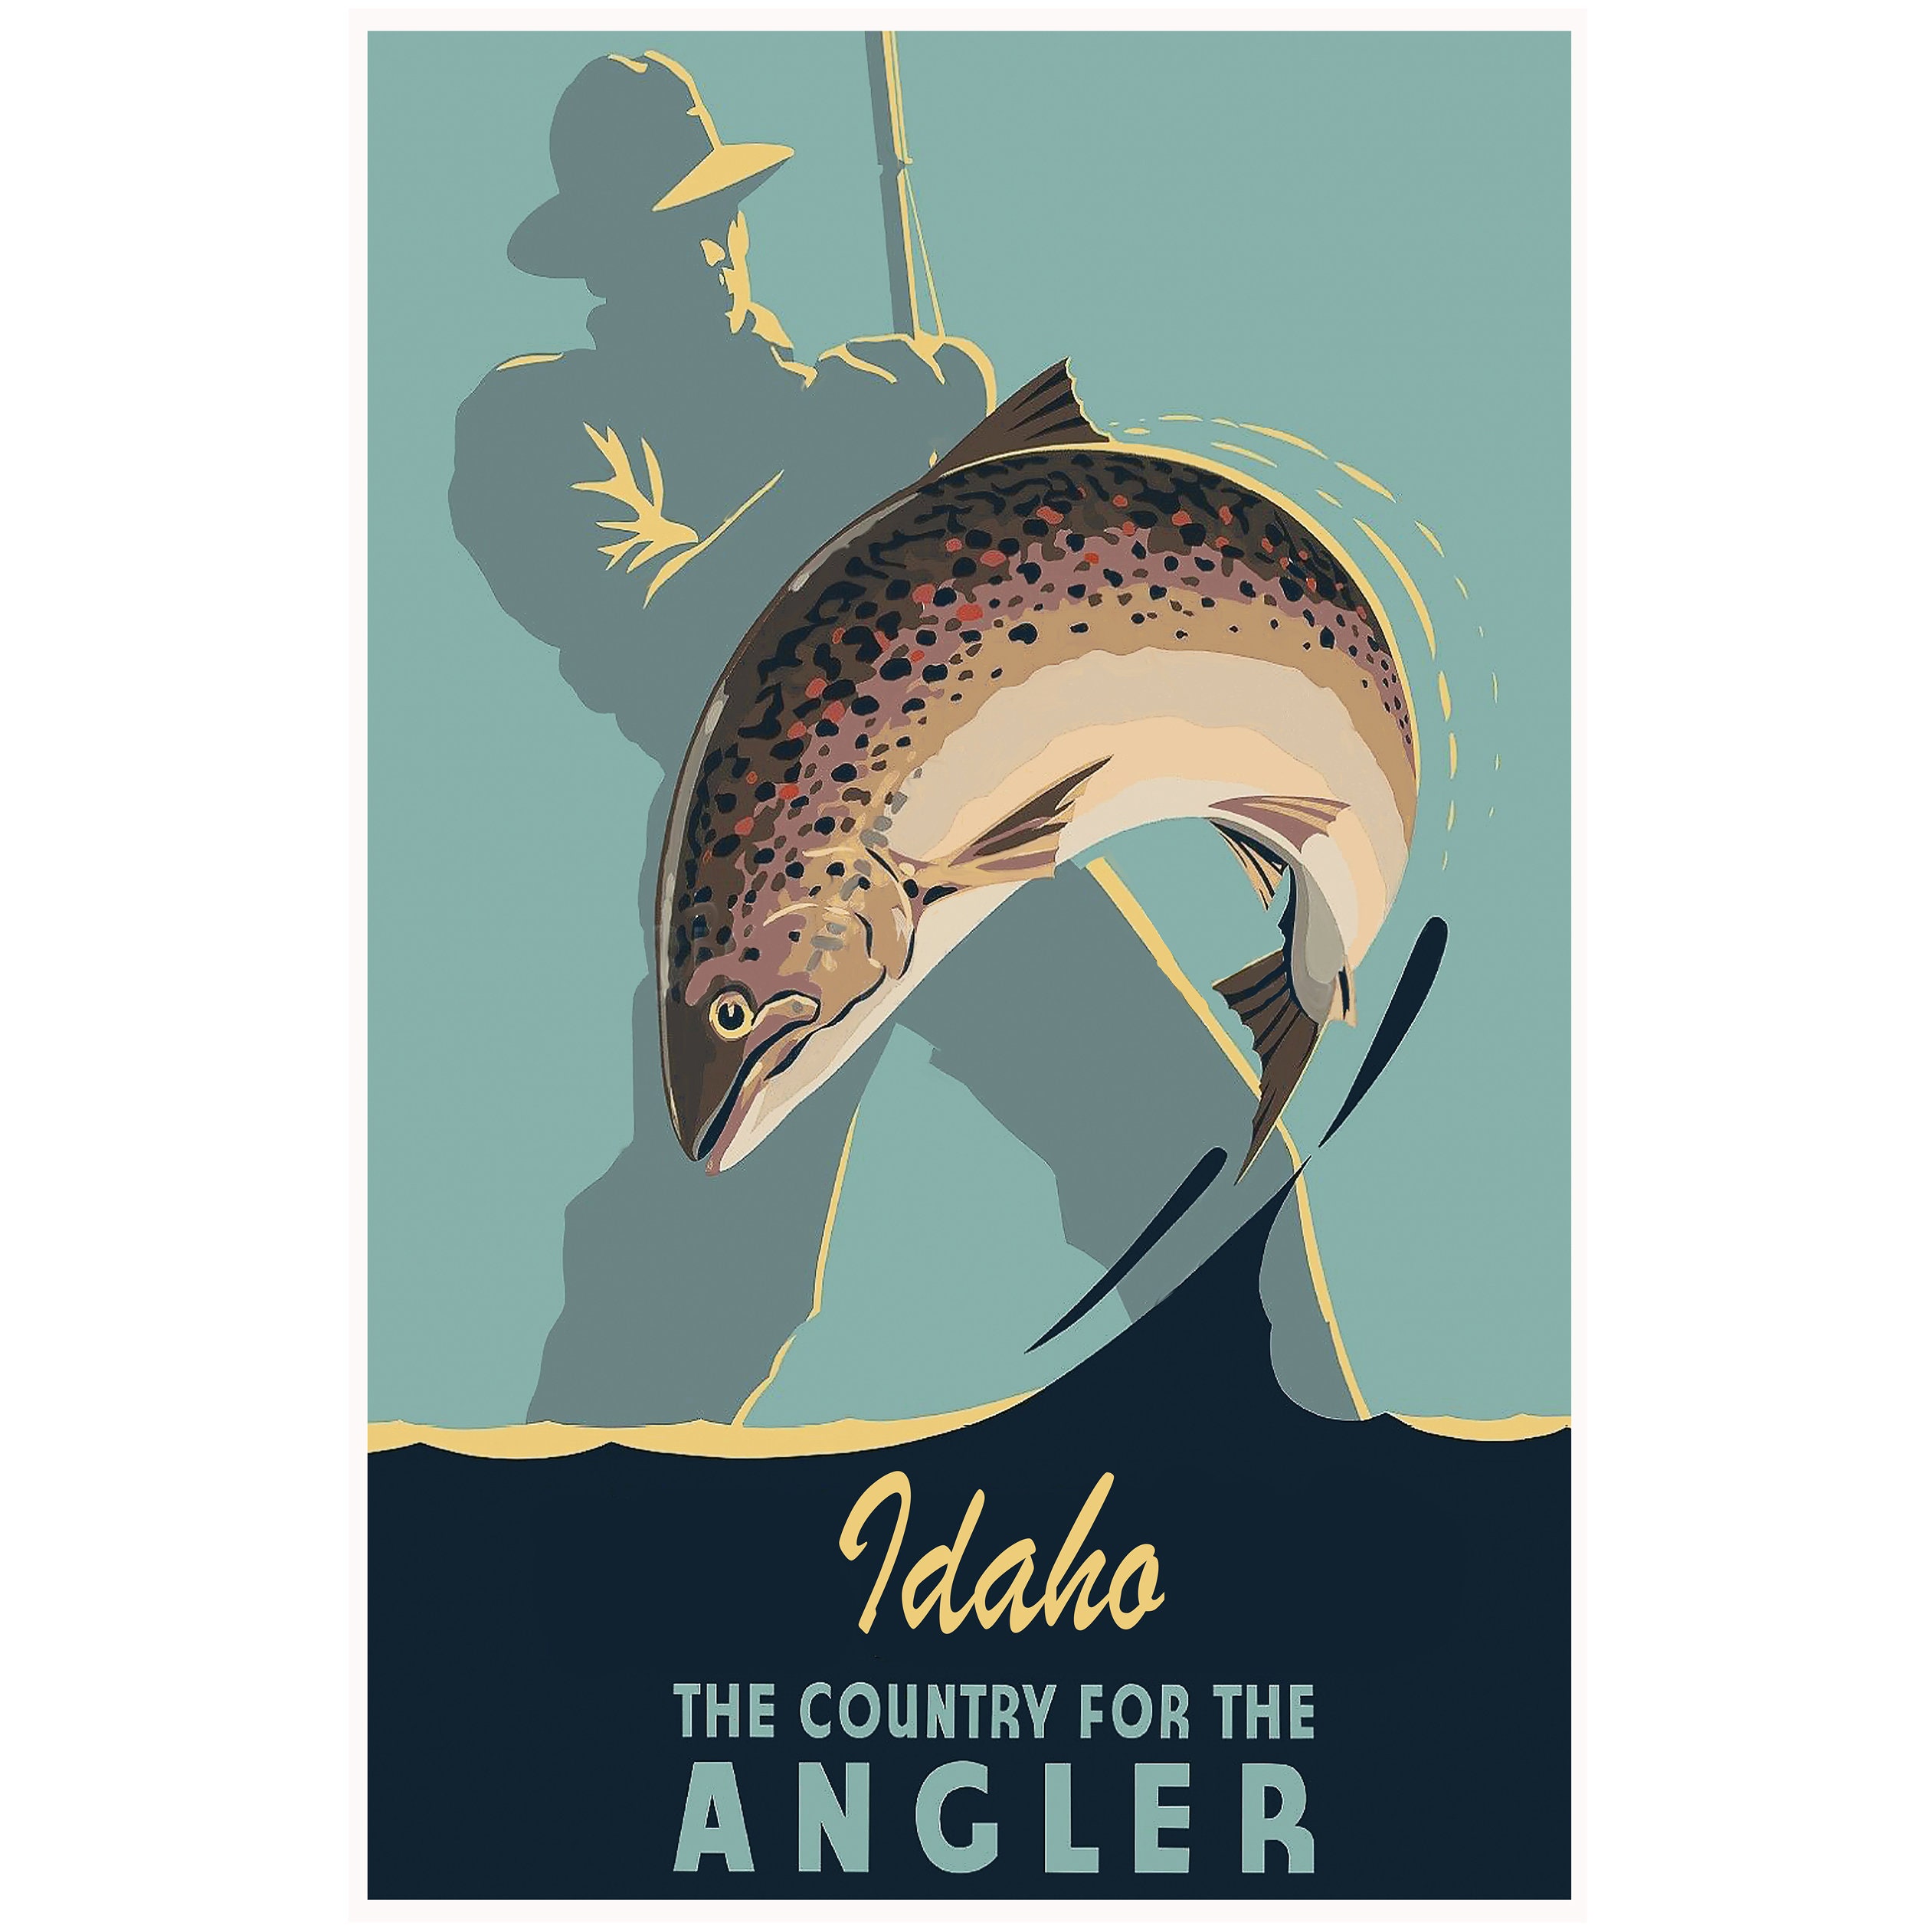 Vintage Inspired Idaho Fishing Travel Poster, Fly Fishing, Trout Fishing,  the Country for the Angler, Wall Art -  Canada